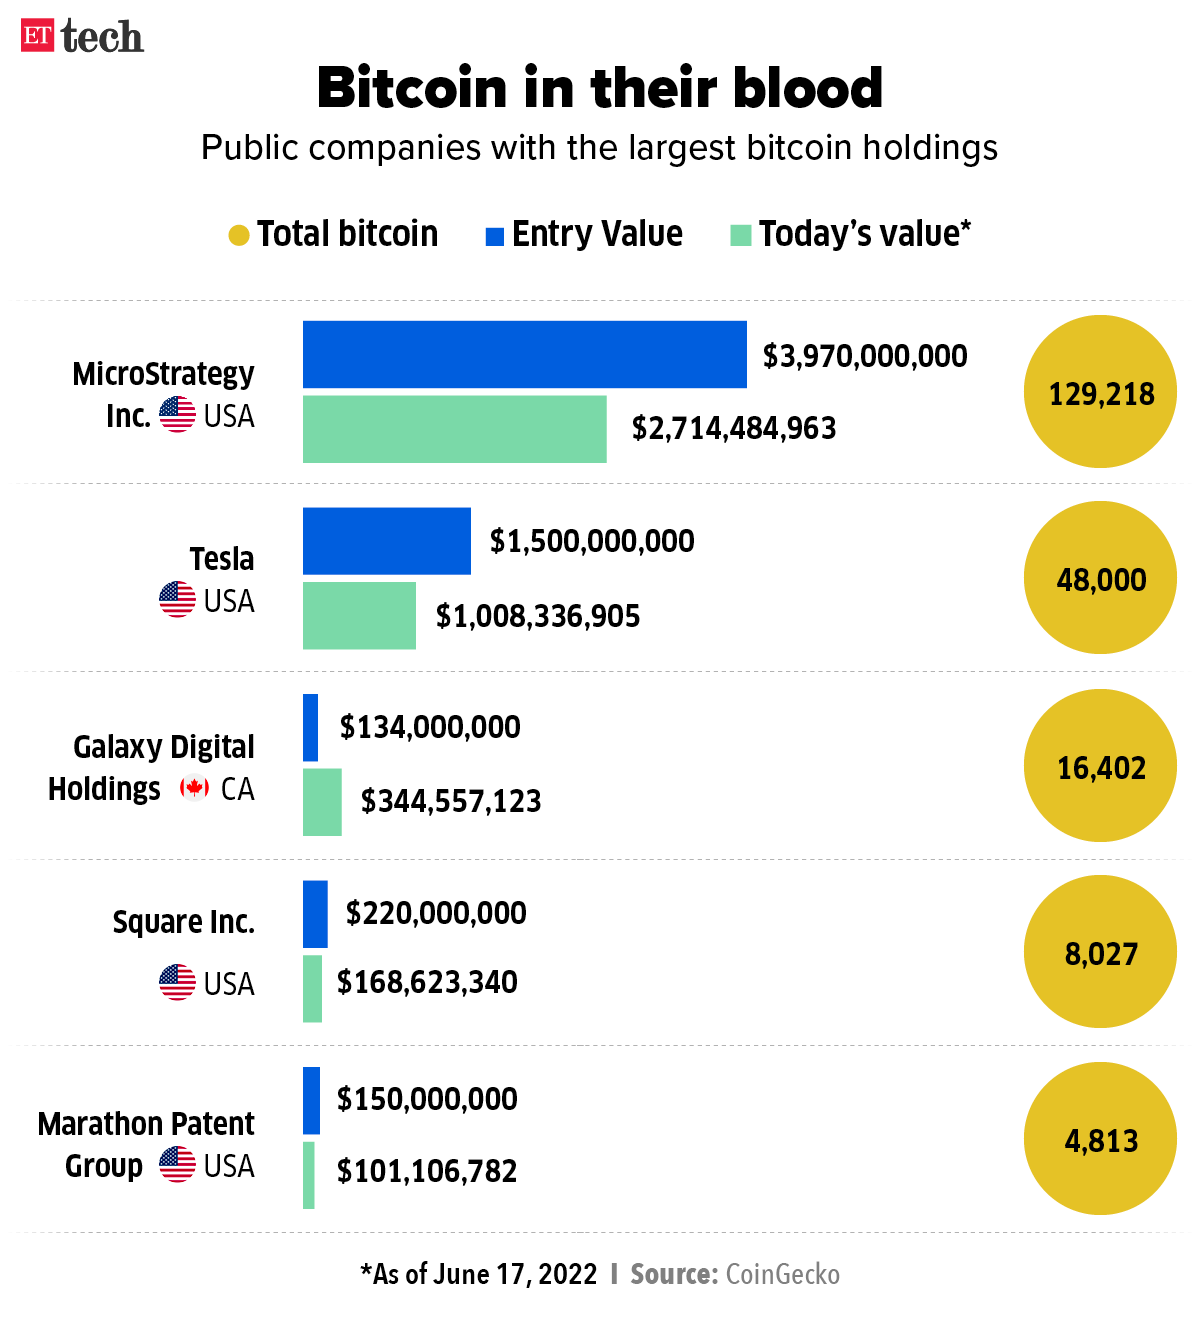 Bitcoin in their blood